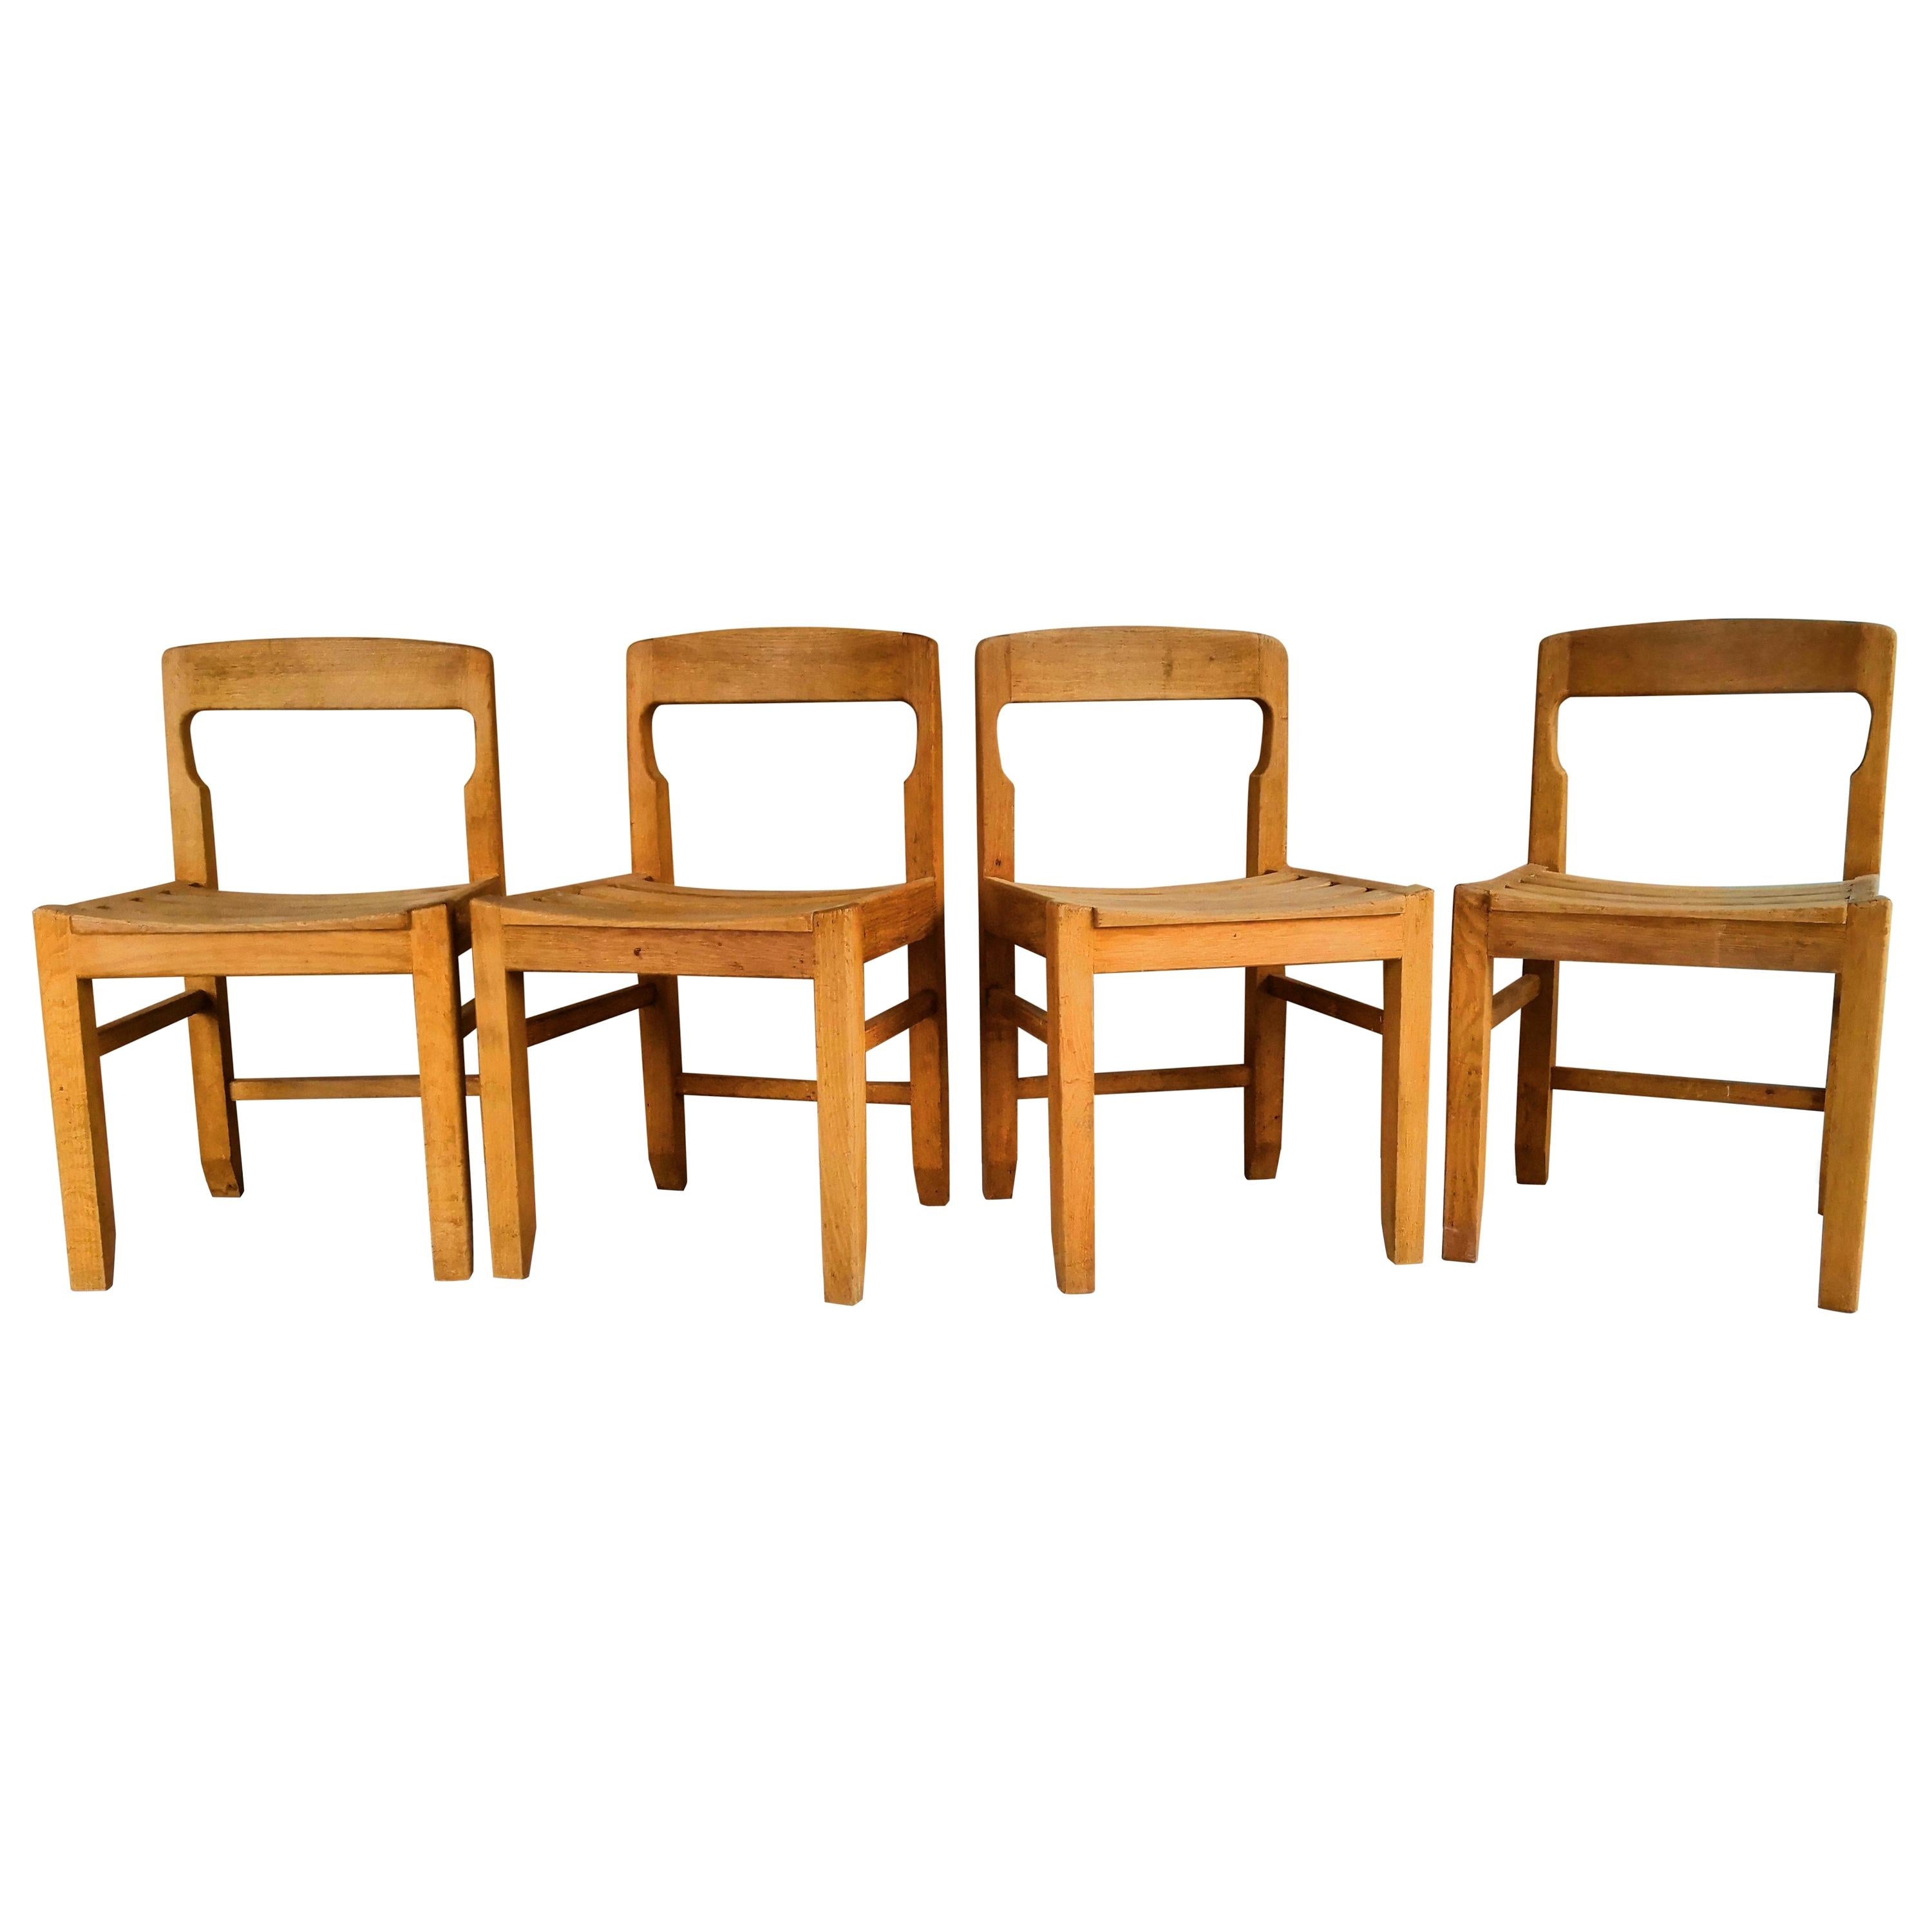 Rare Set of Four Solid French Oak Chairs by Guillerme & Chambron, France, 1960s